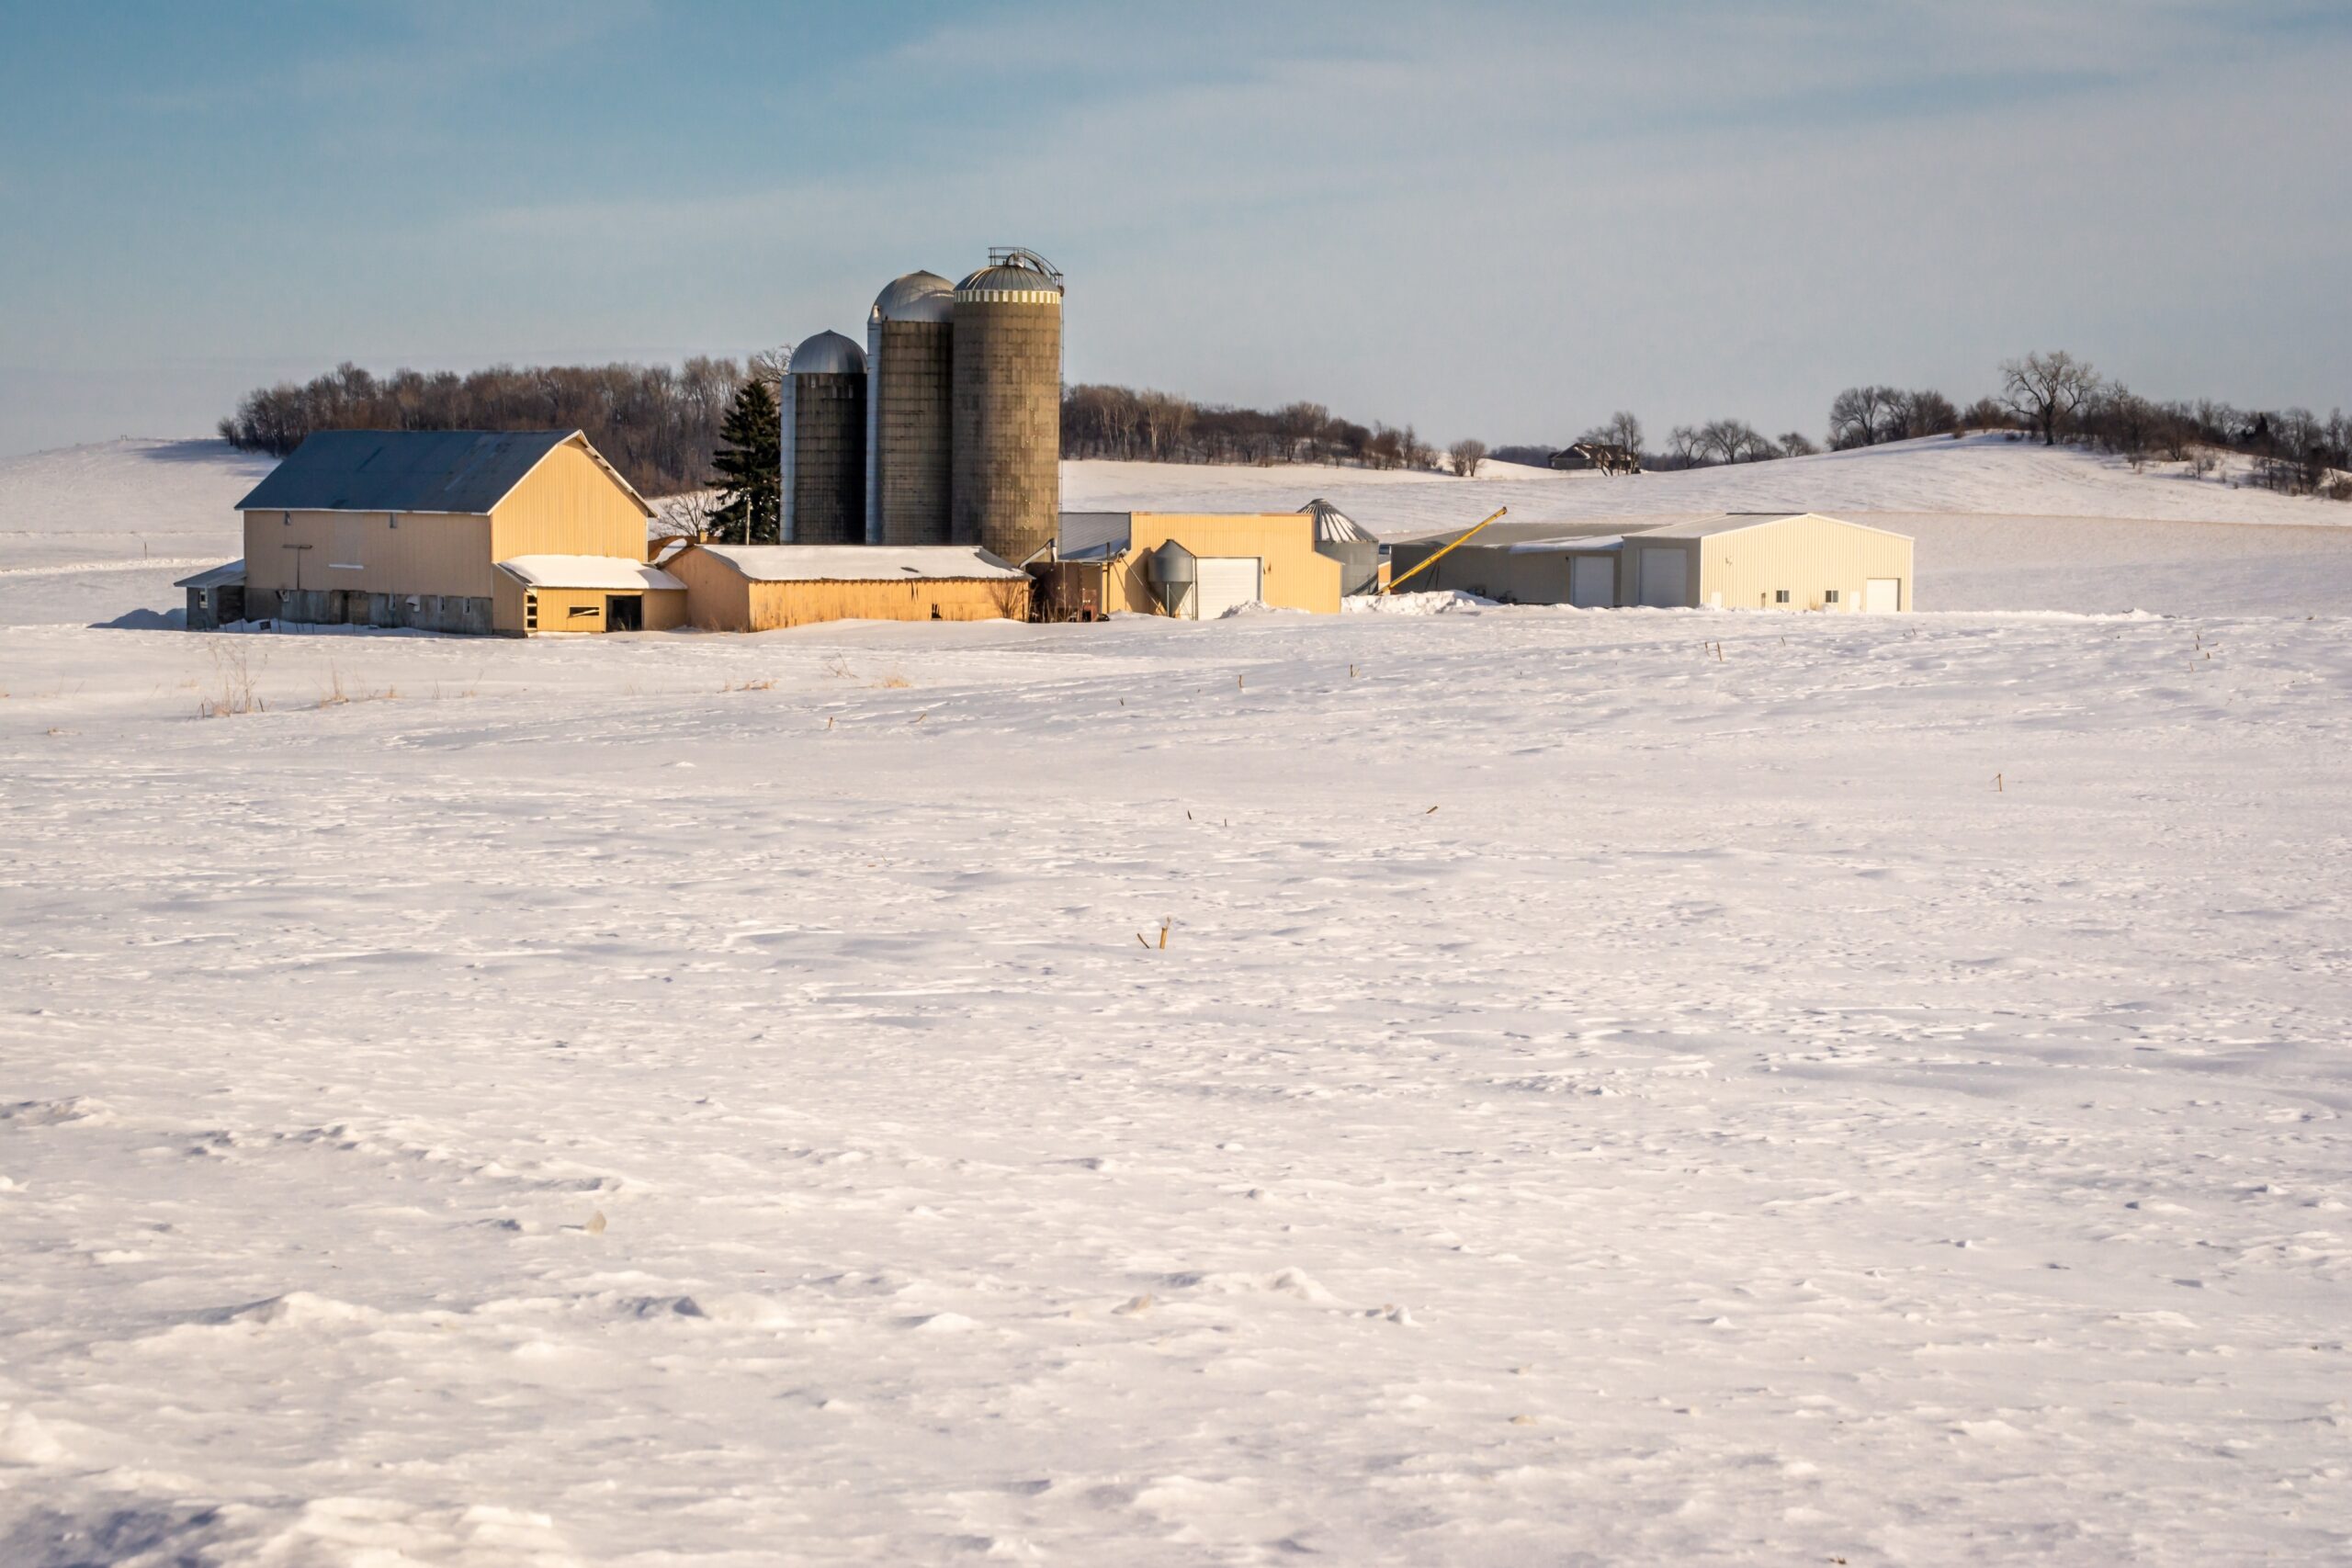 Wisconsin Farm Groups Applaud Special Session Bills Focused On Improving Outcomes For Farmers